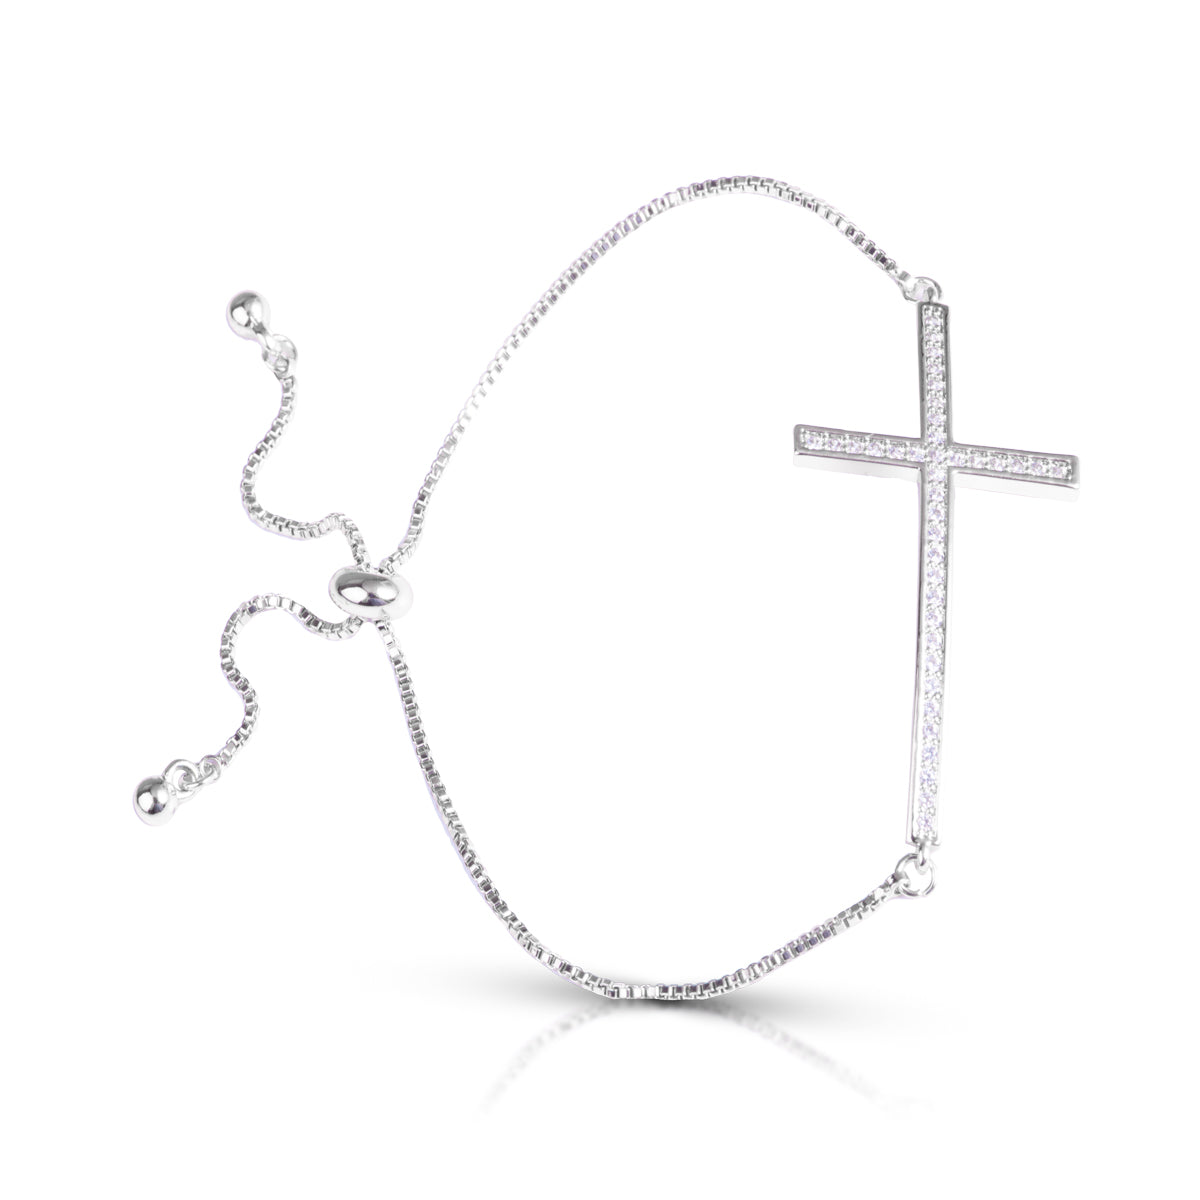 Arched Cross Pull Cord Bracelet